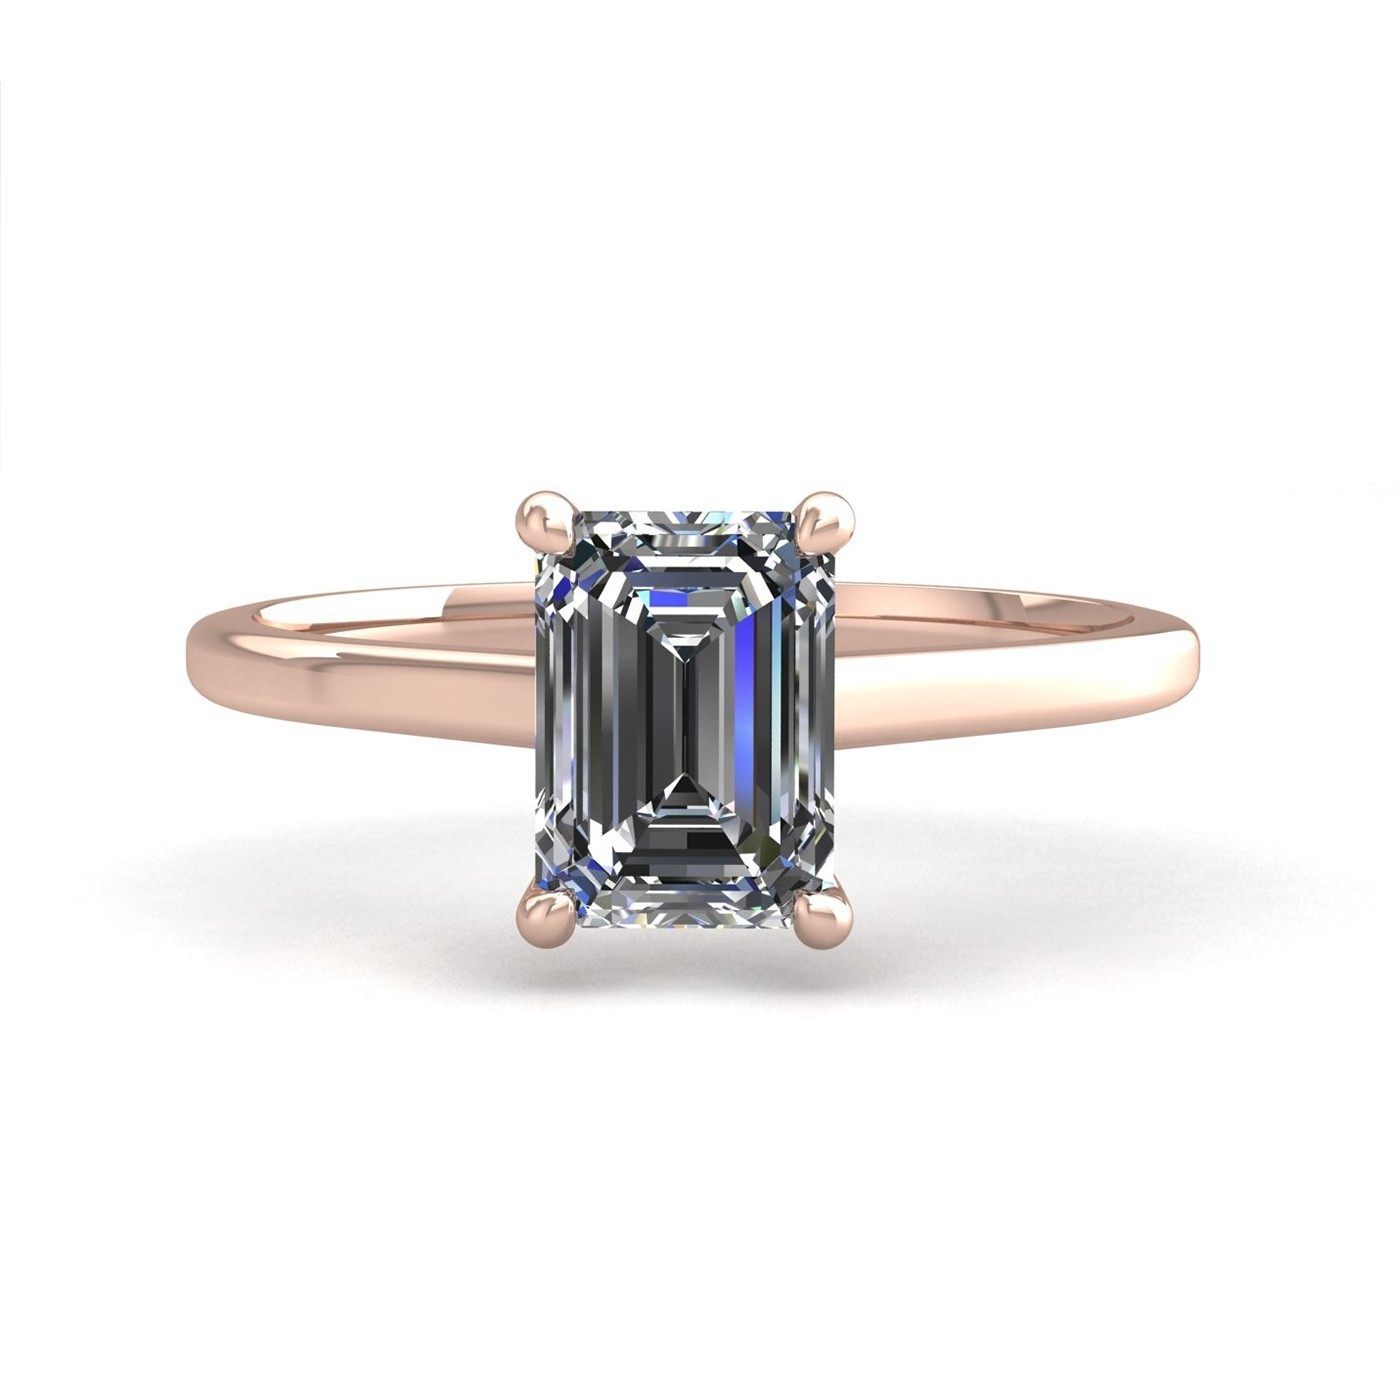 18K ROSE GOLD 4 PRONGS SOLITAIRE EMERALD CUT DIAMOND ENGAGEMENT RING WITH WHISPER THIN BAND